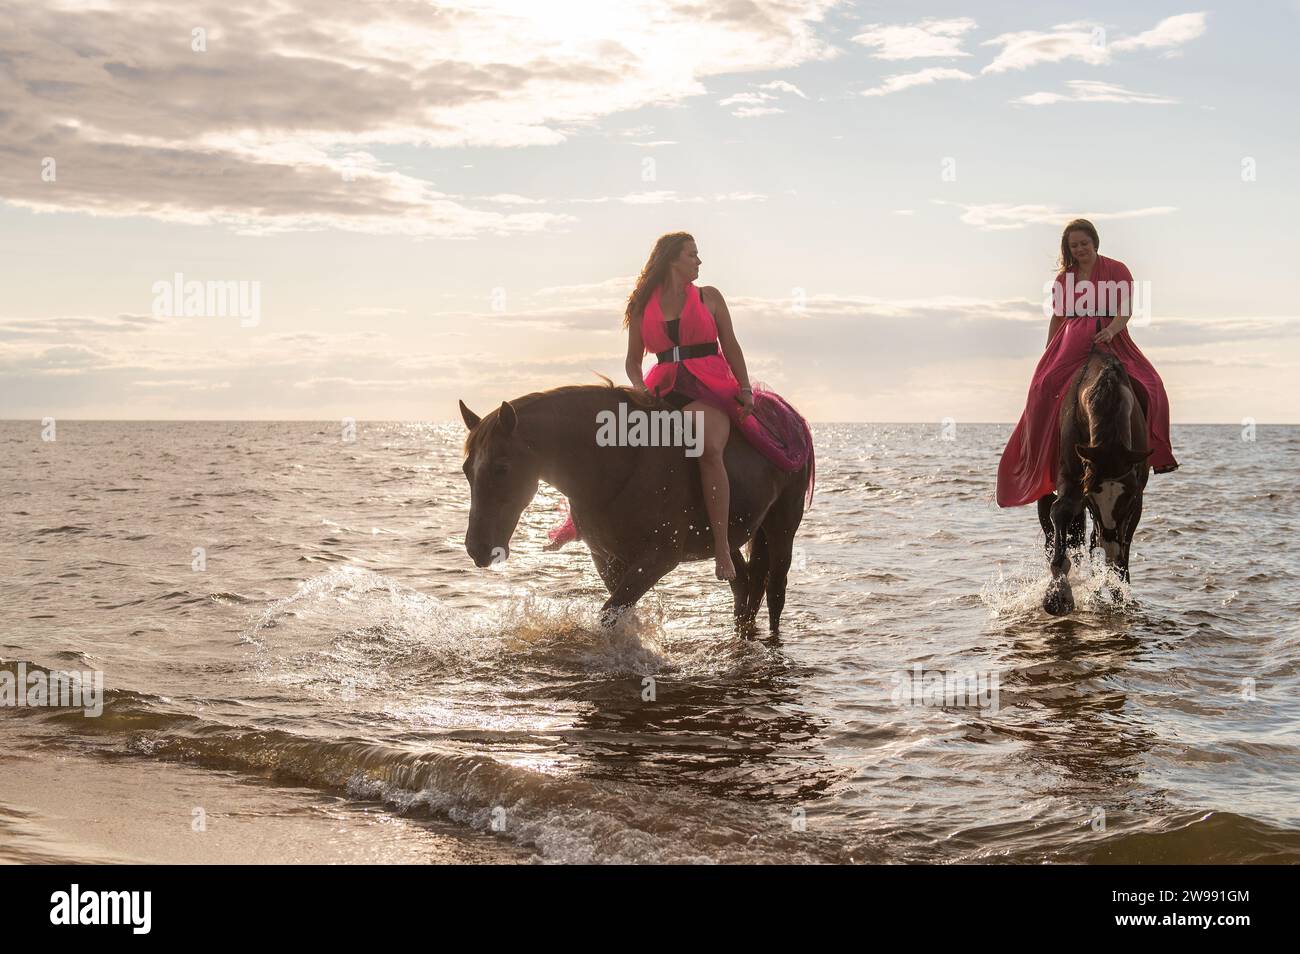 A pair of young female friends in matching dresses posing on horses standing on a beach Stock Photo